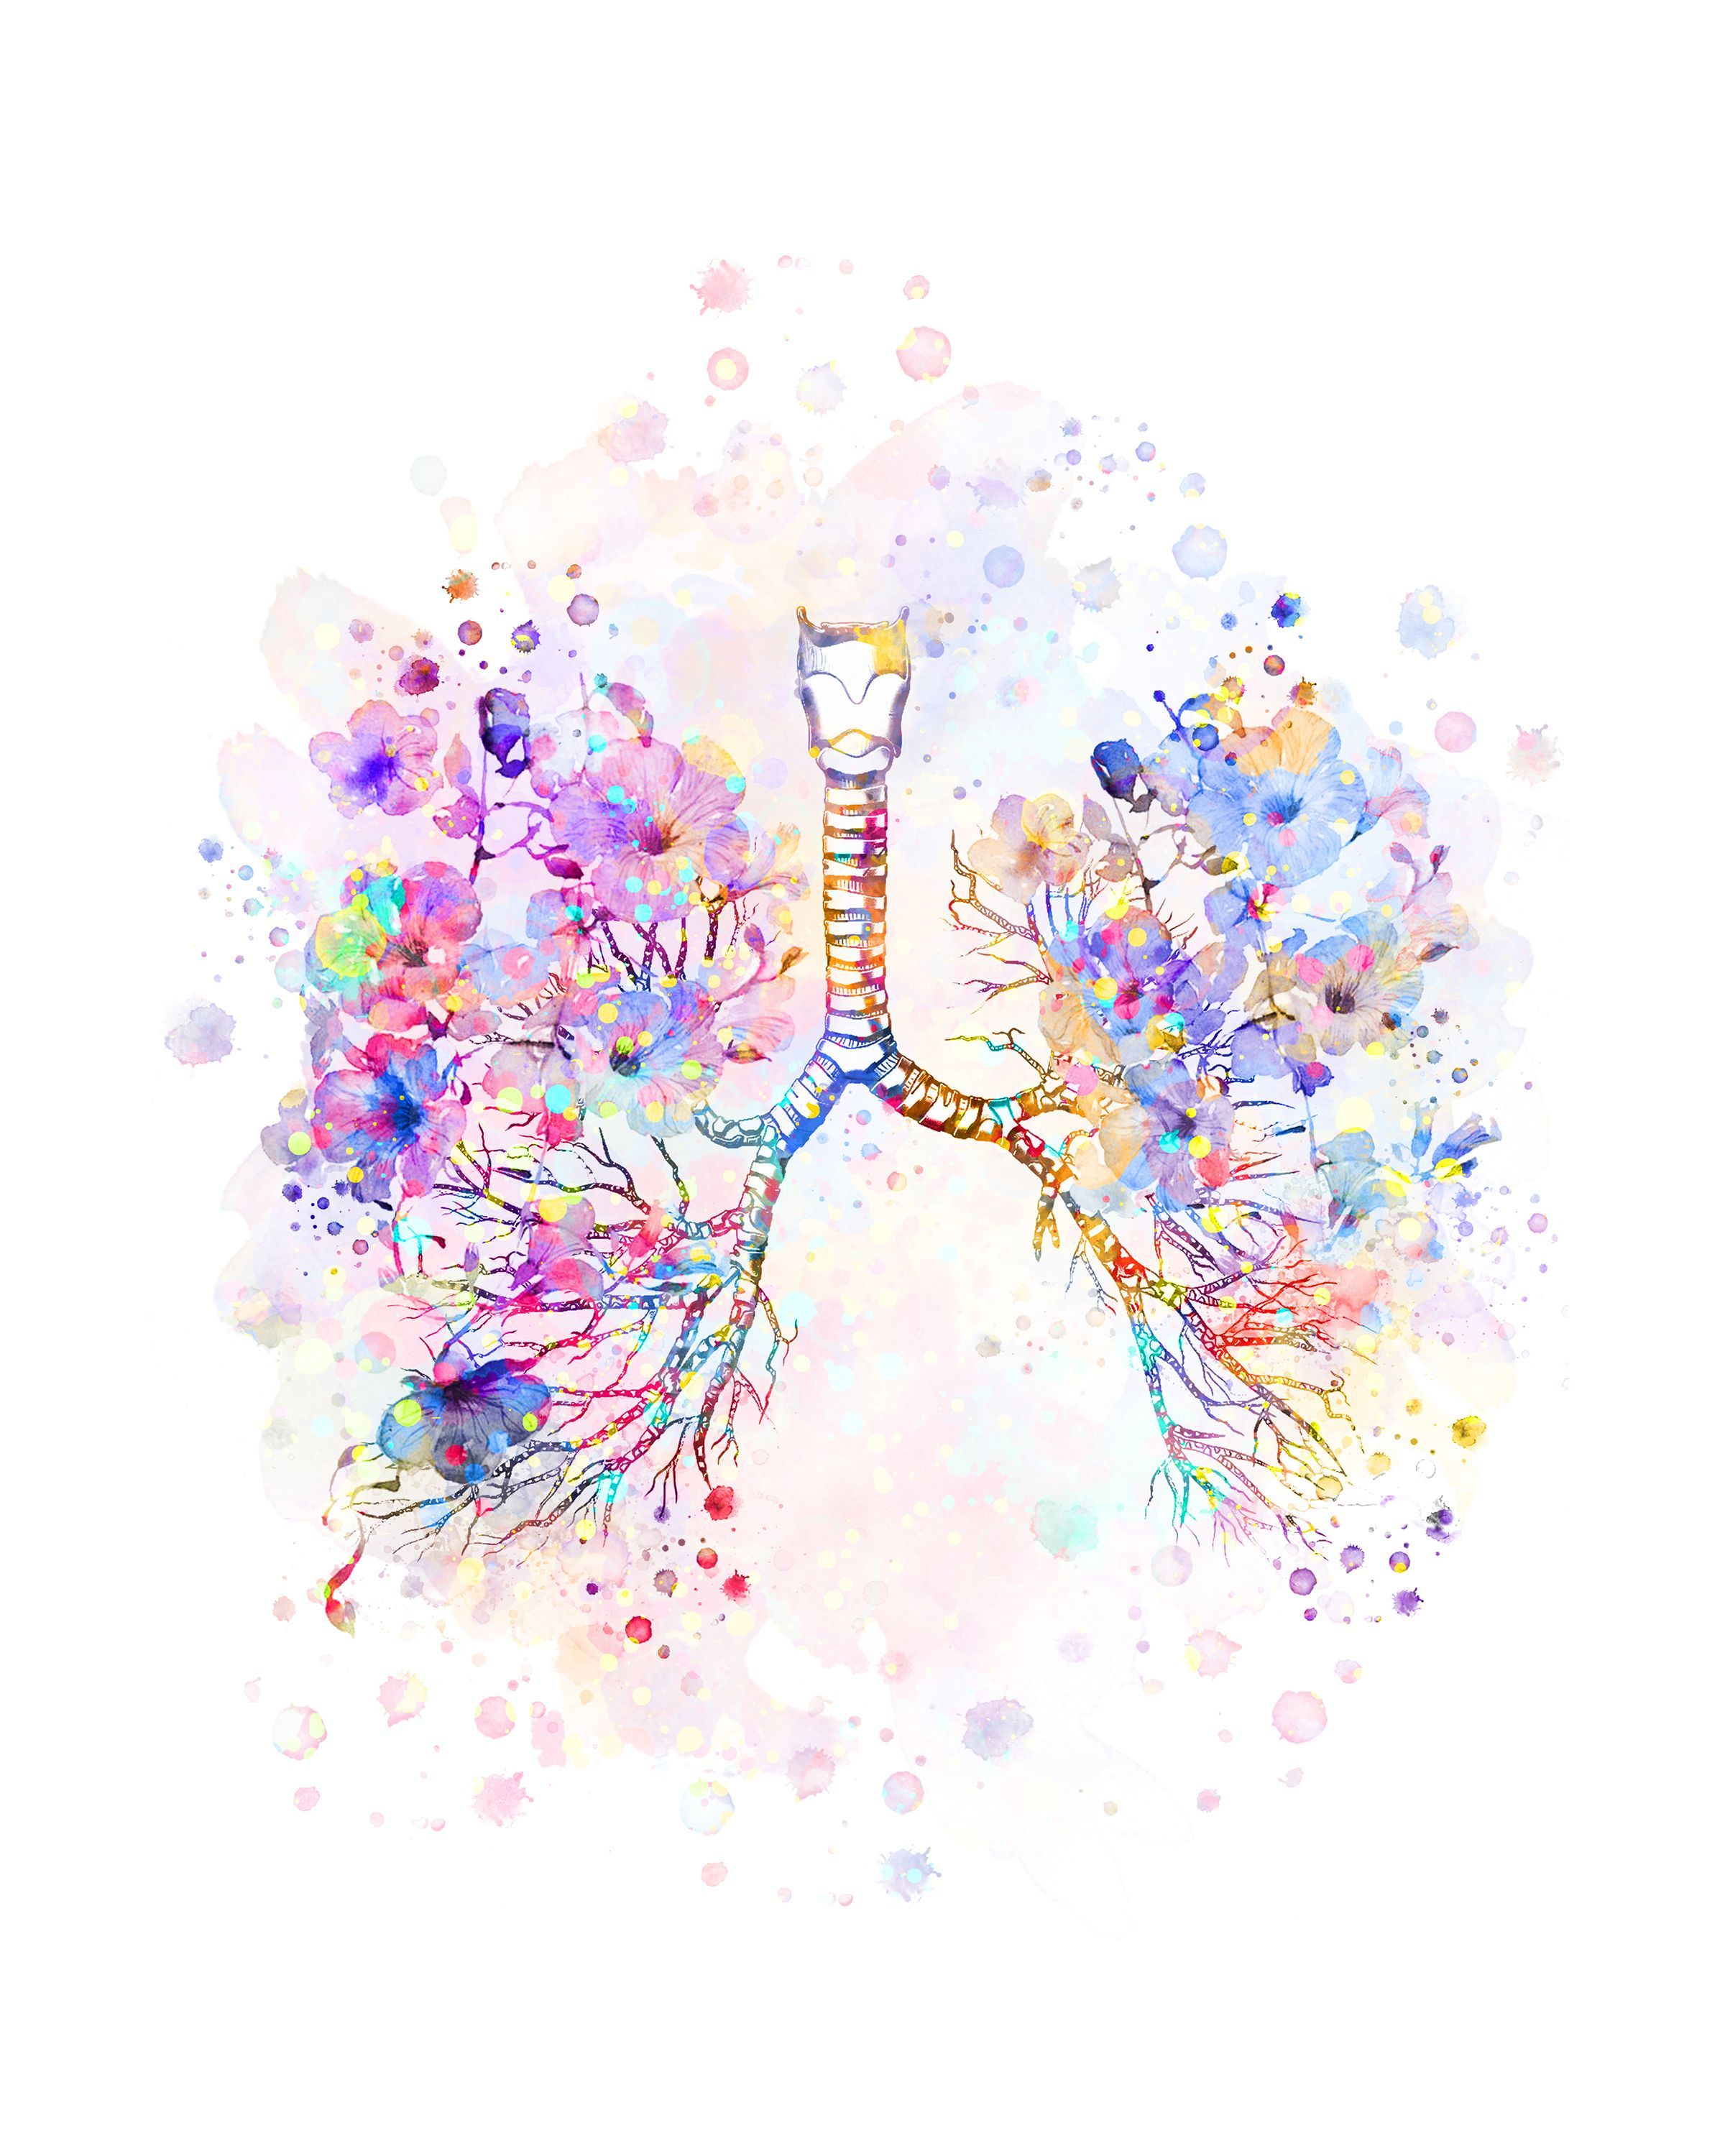 Lungs Images | Free Photos, PNG Stickers, Wallpapers & Backgrounds -  rawpixel